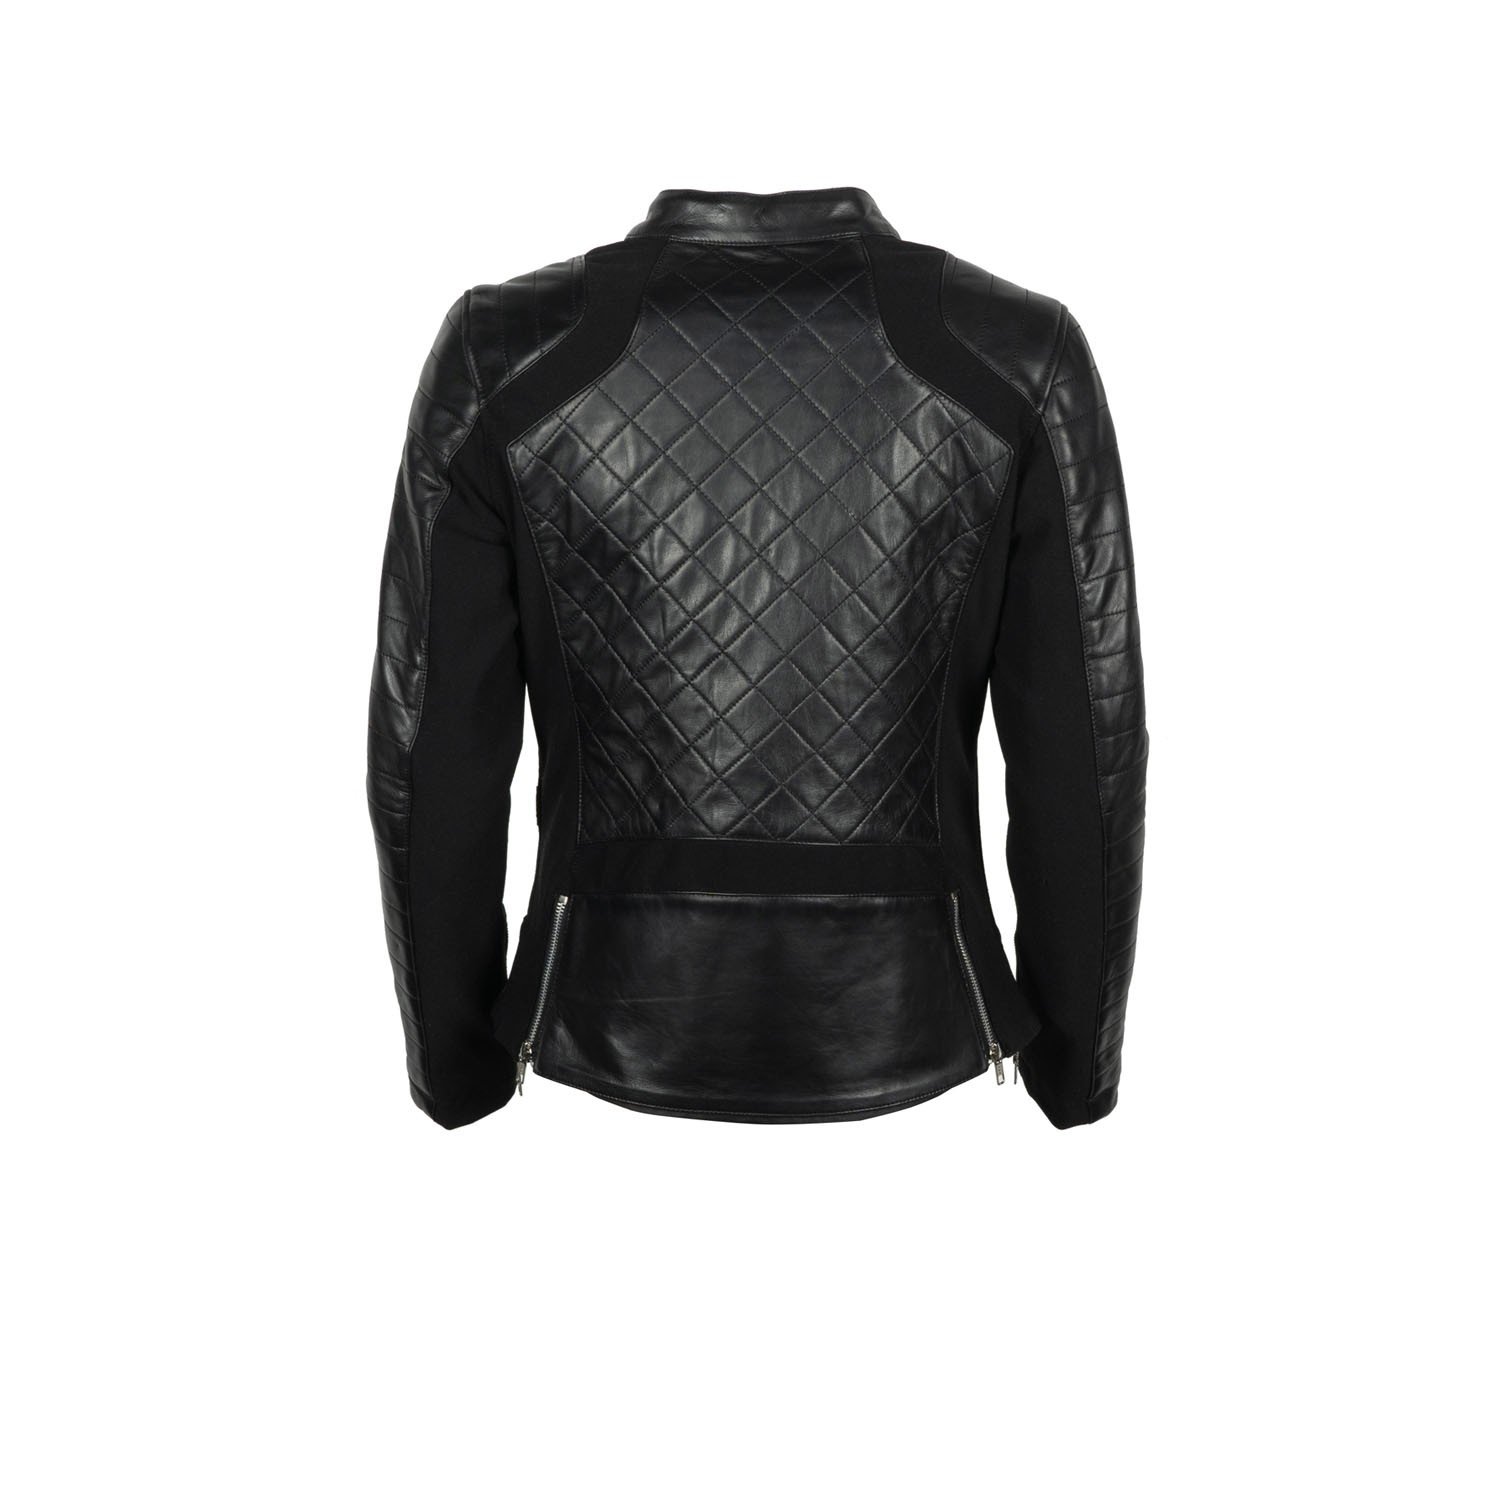 Image of Helstons Kate Leather Soft Stretch Jacket Black Size M ID 3662136085039